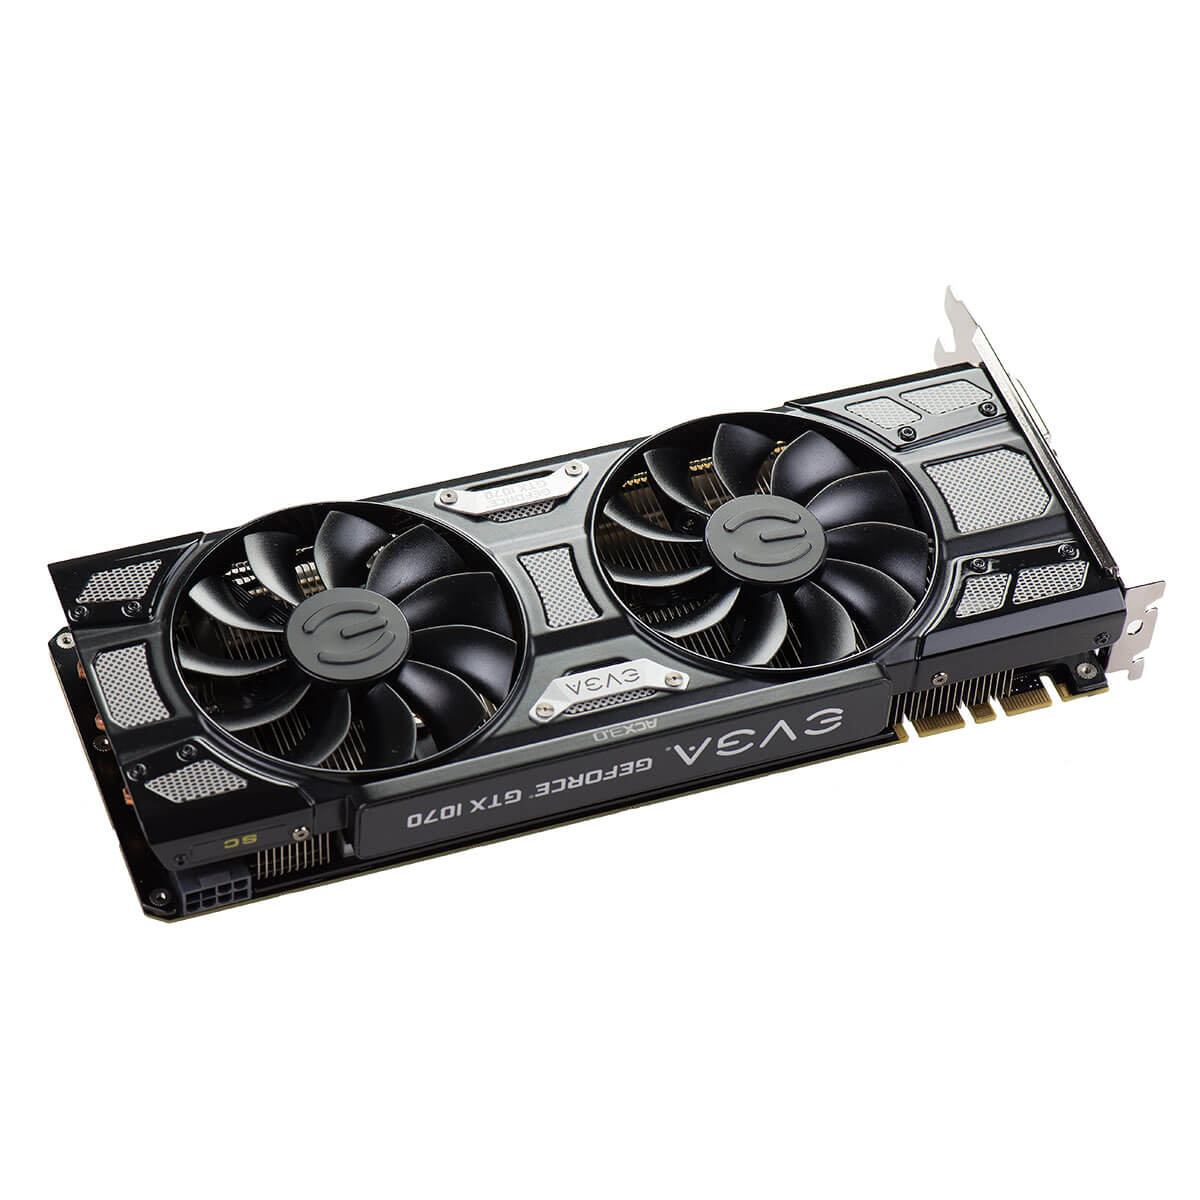 https://images.evga.com/products/gallery/08G-P4-5173-KR_XL_6.jpg